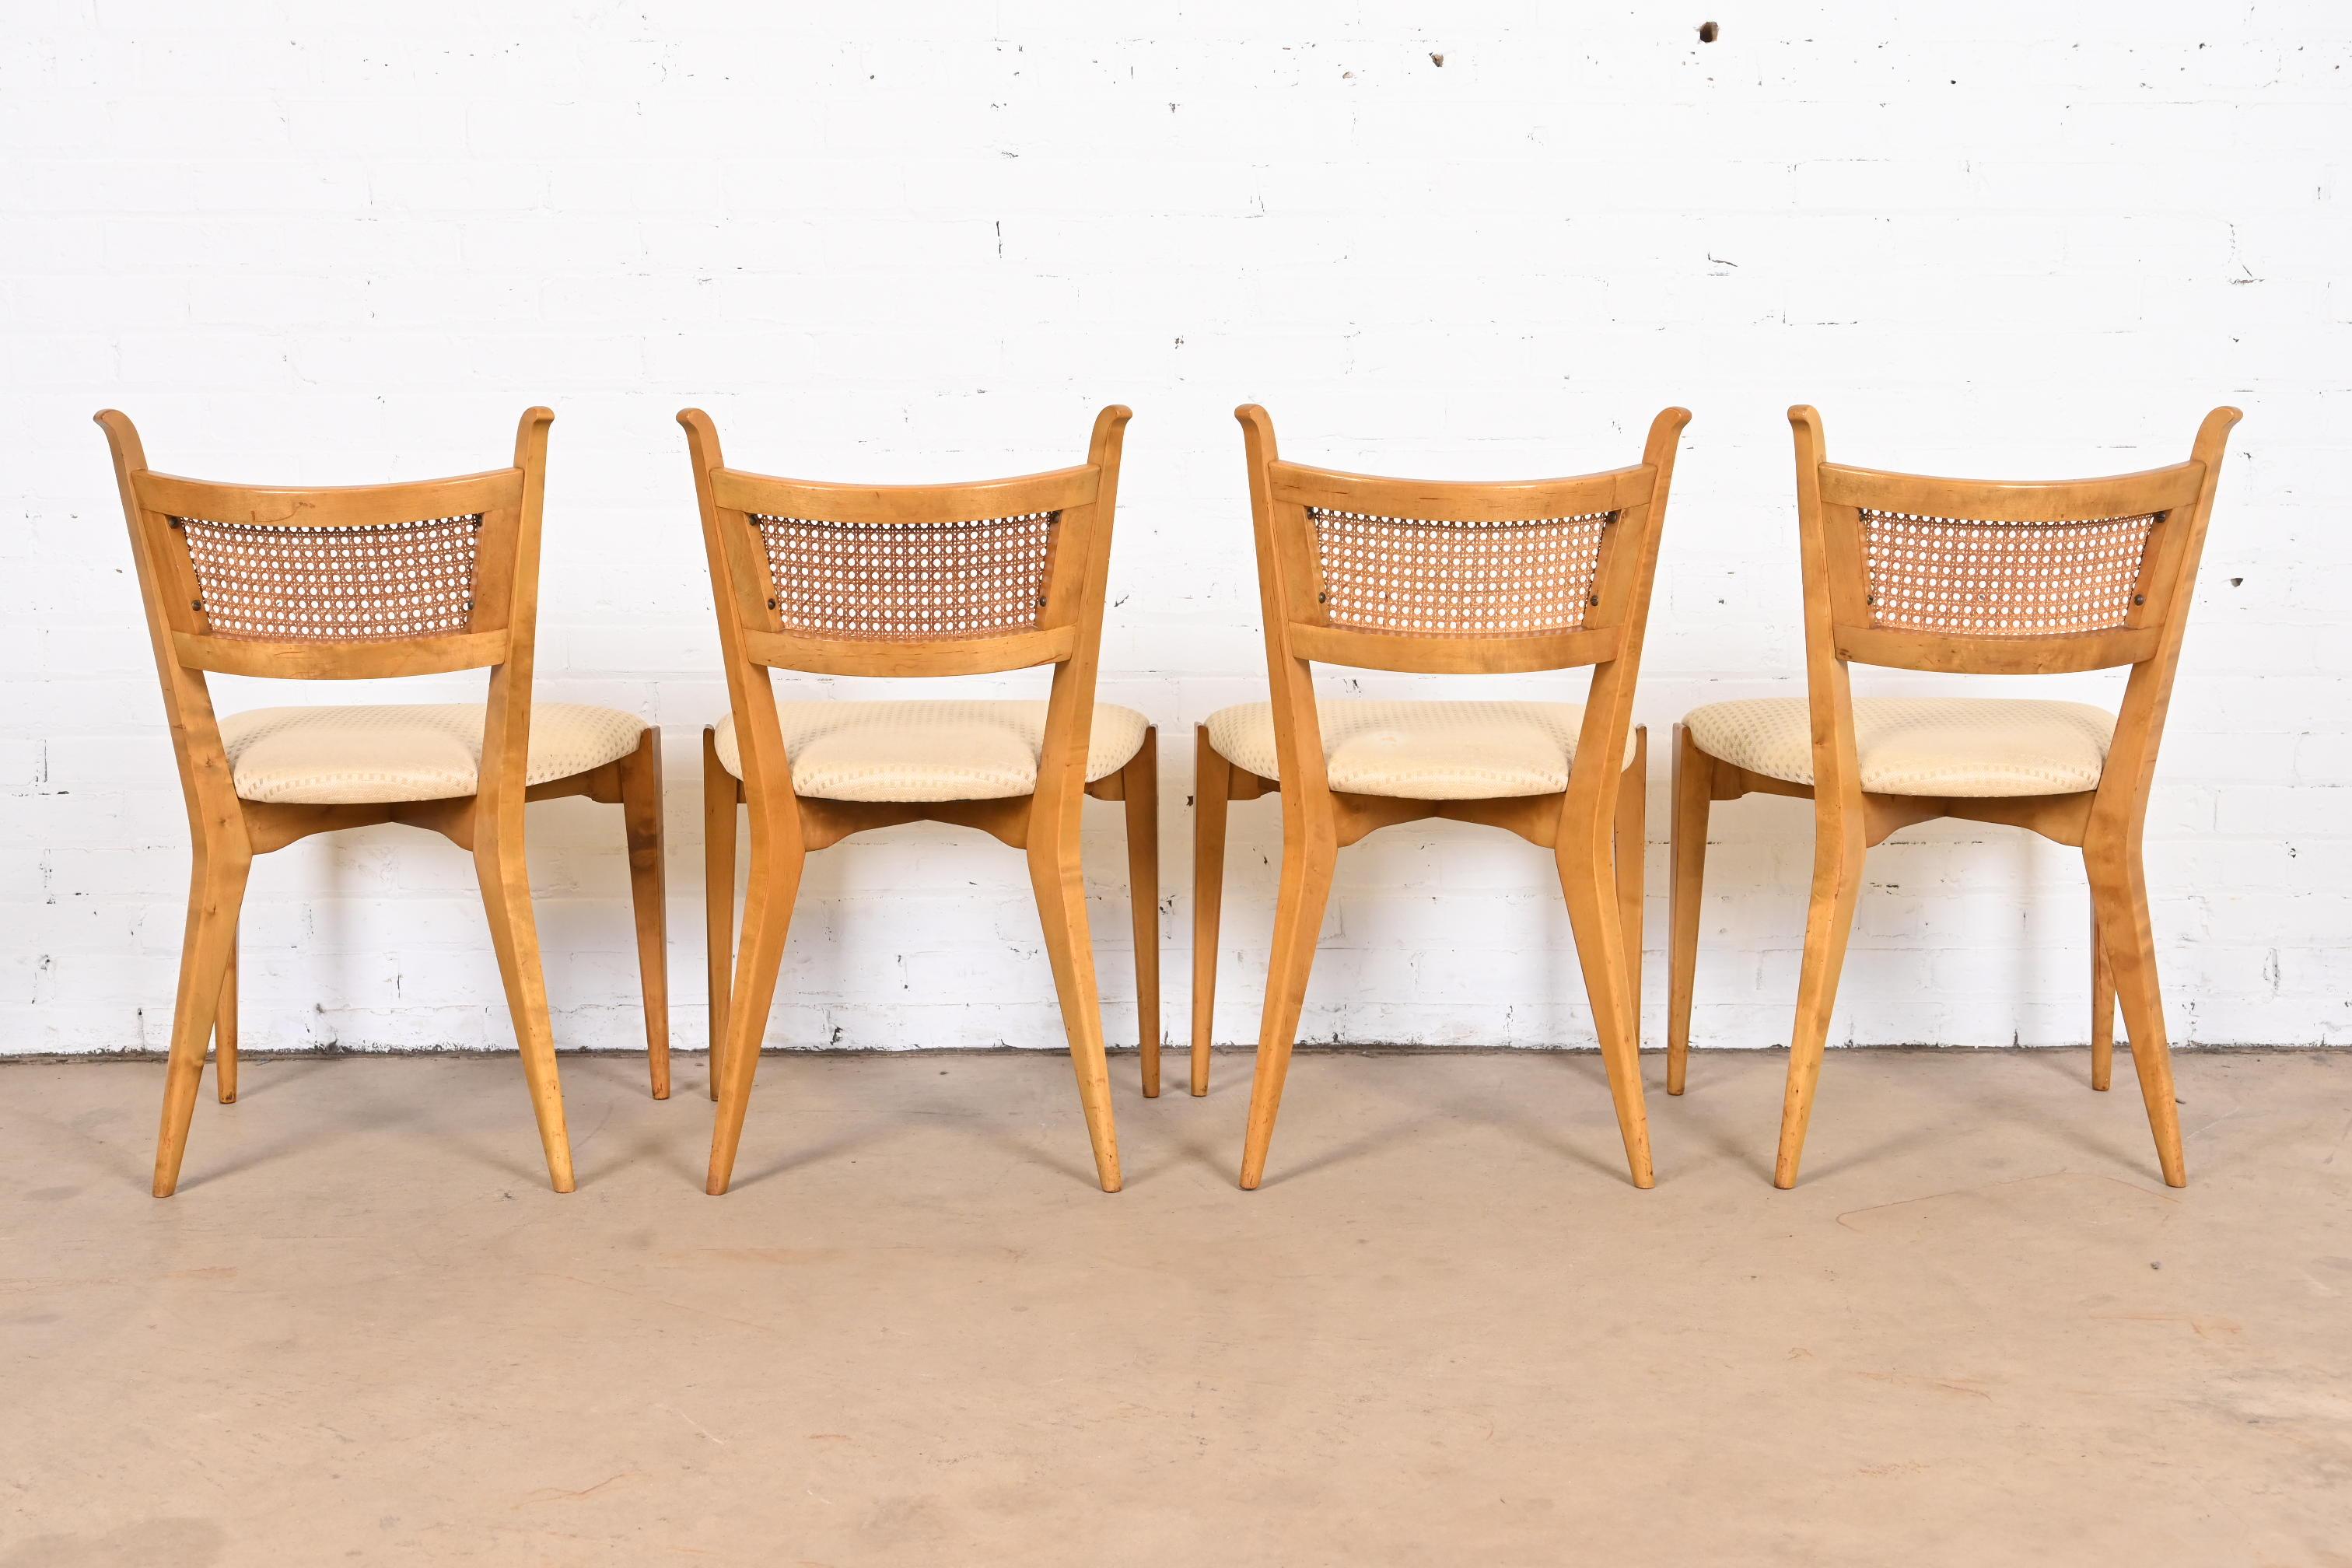 Edmond Spence Swedish Modern Sculpted Maple and Cane Dining Chairs, Set of Four For Sale 3